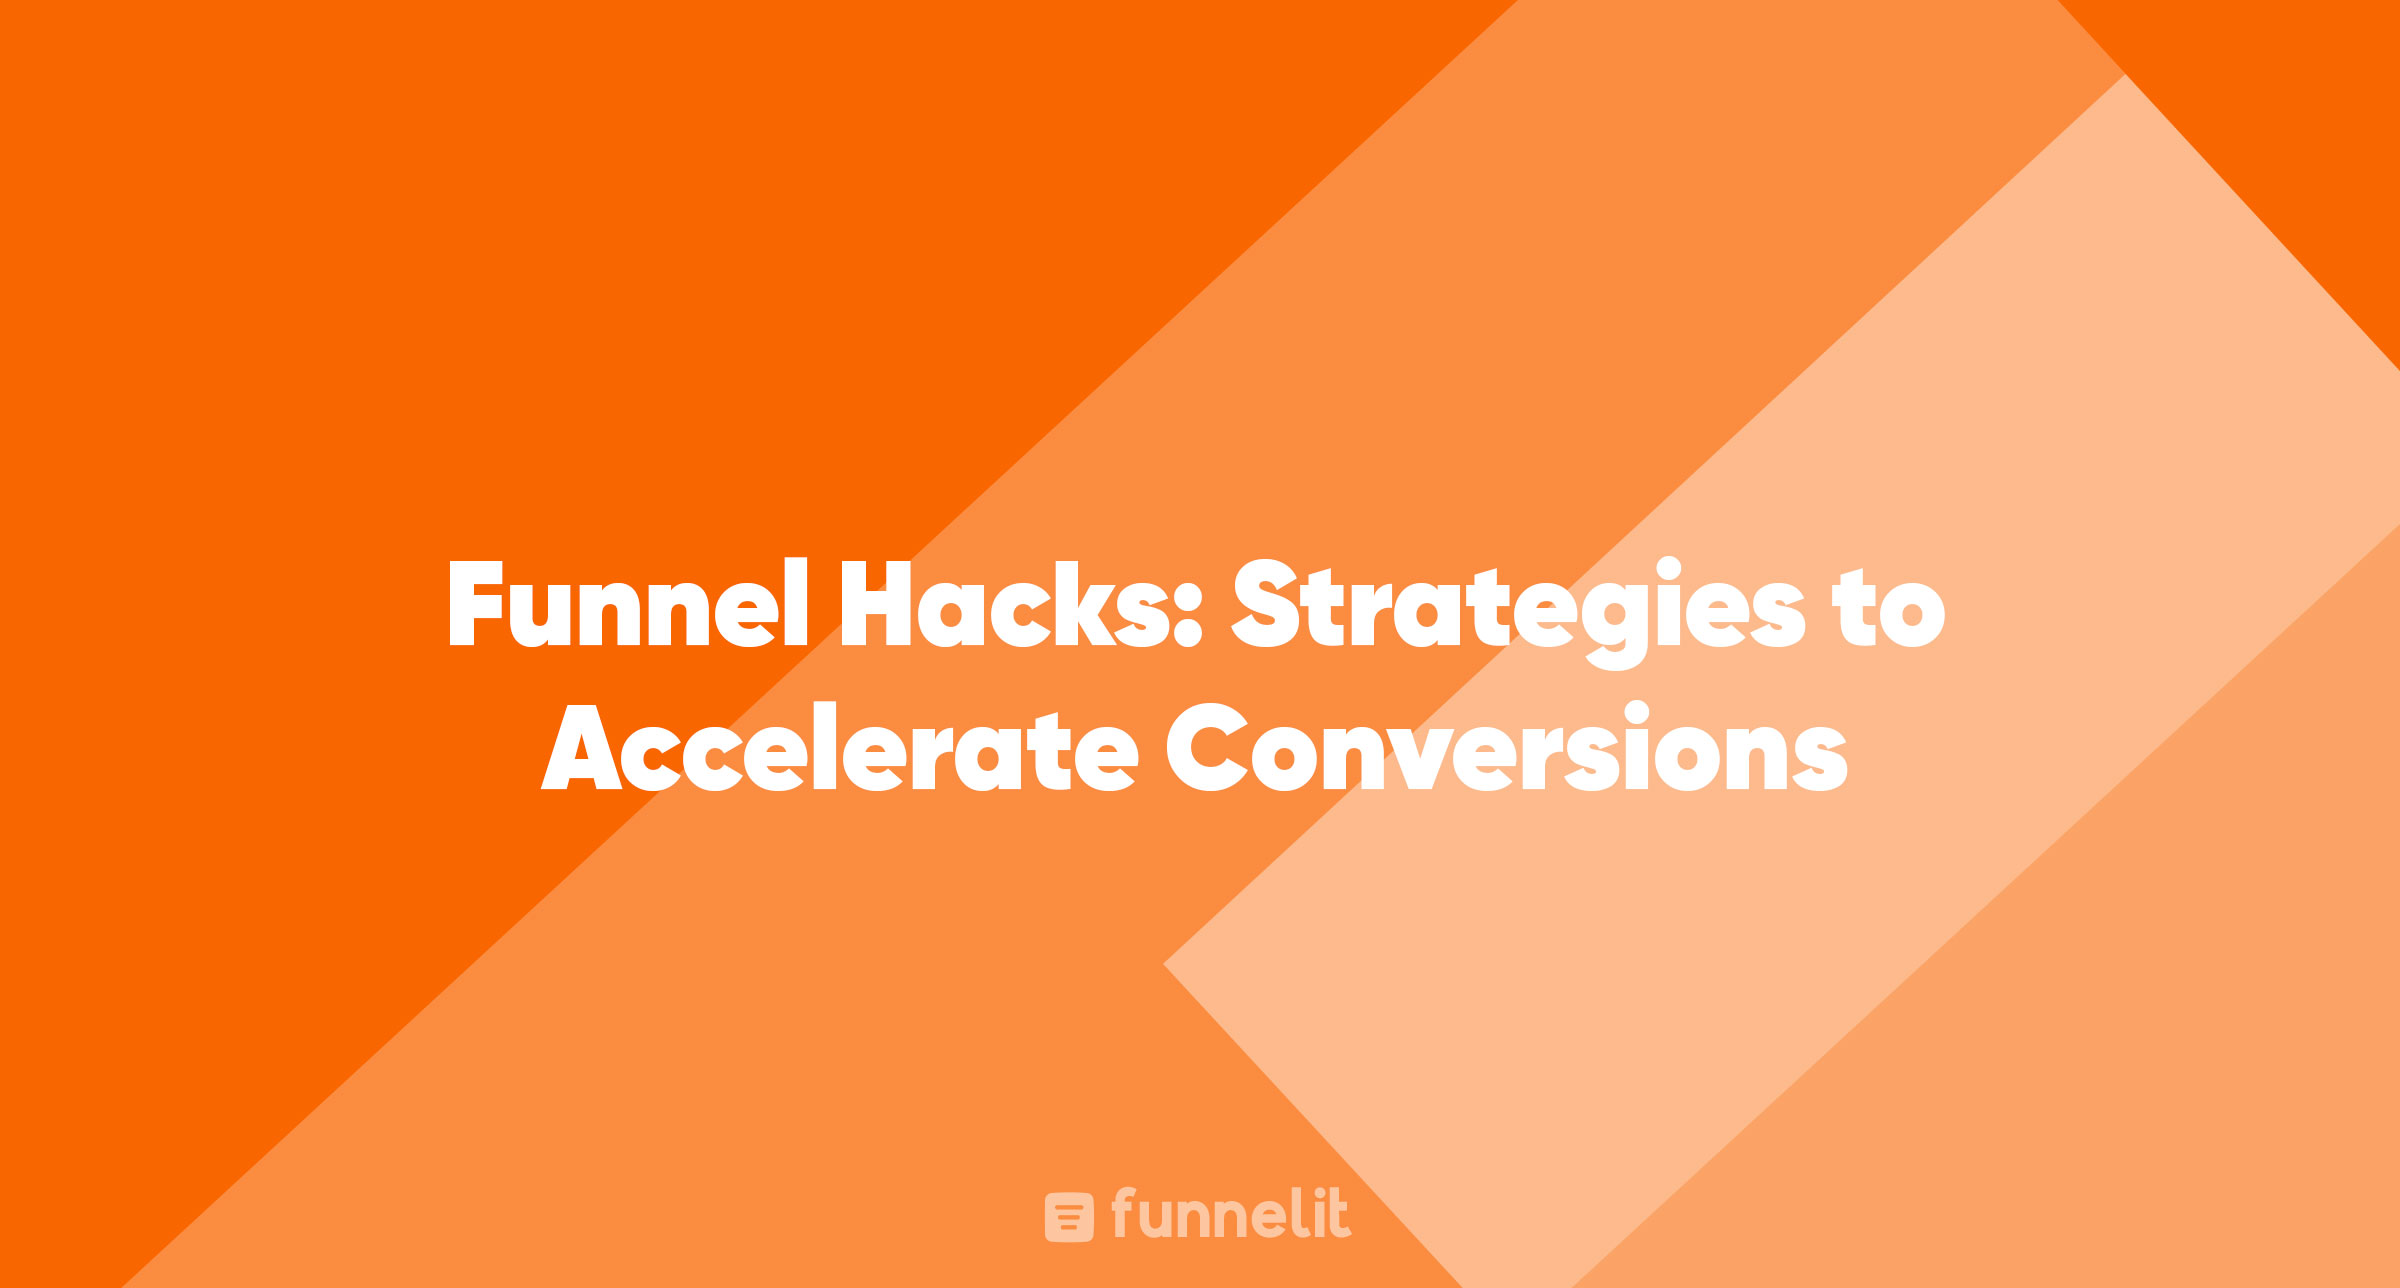 Article | Funnel Hacks: Strategies to Accelerate Conversions